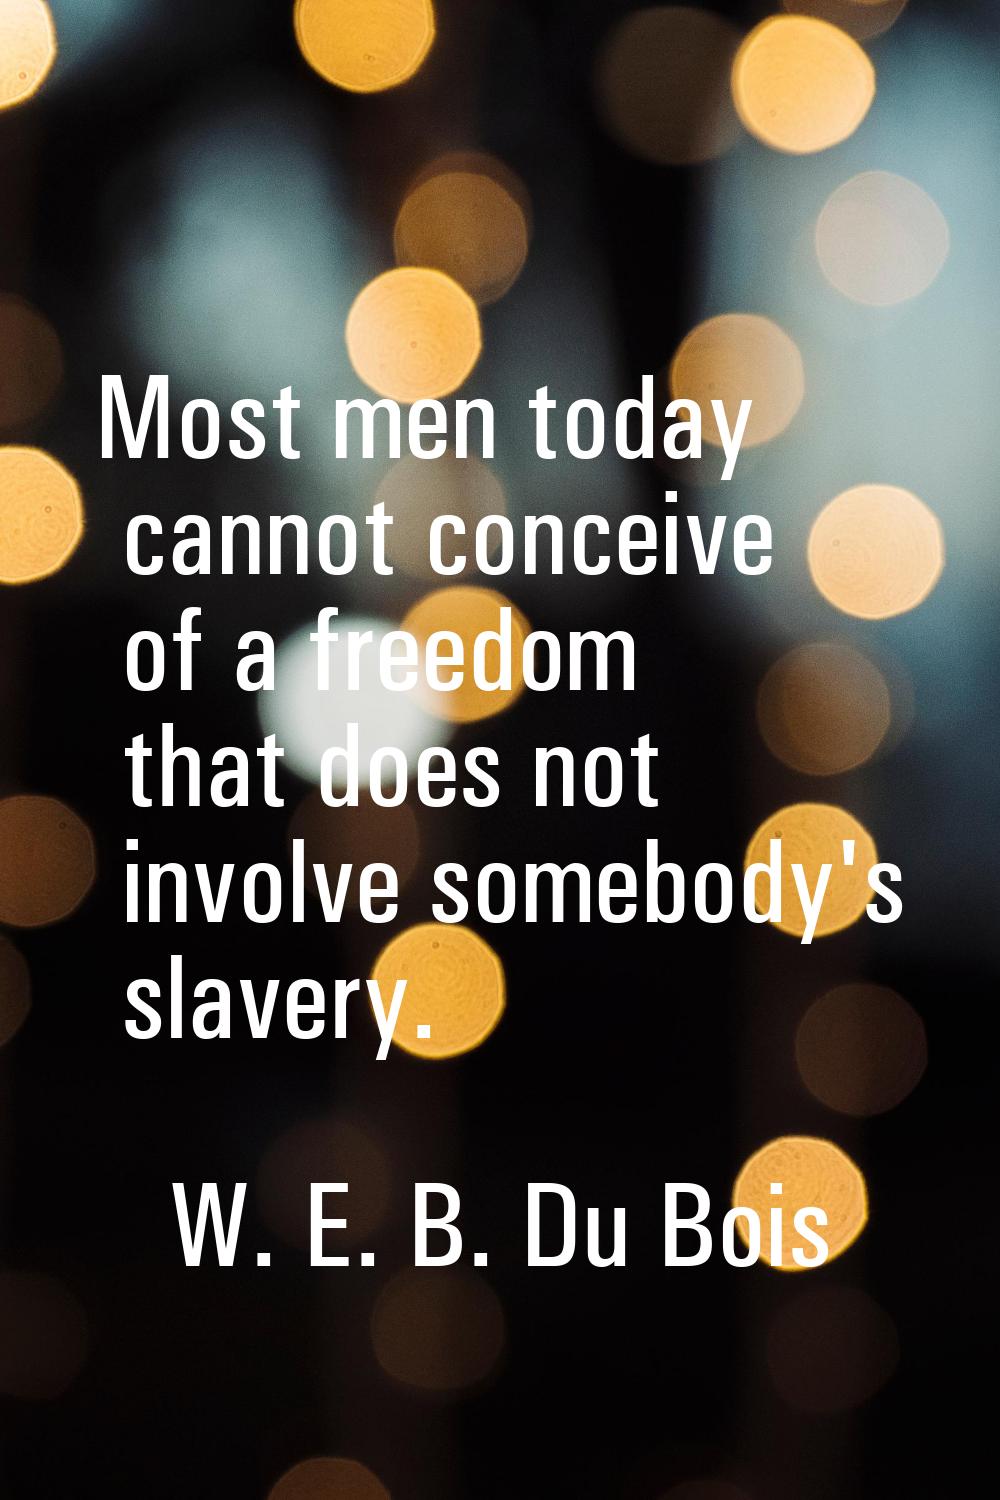 Most men today cannot conceive of a freedom that does not involve somebody's slavery.